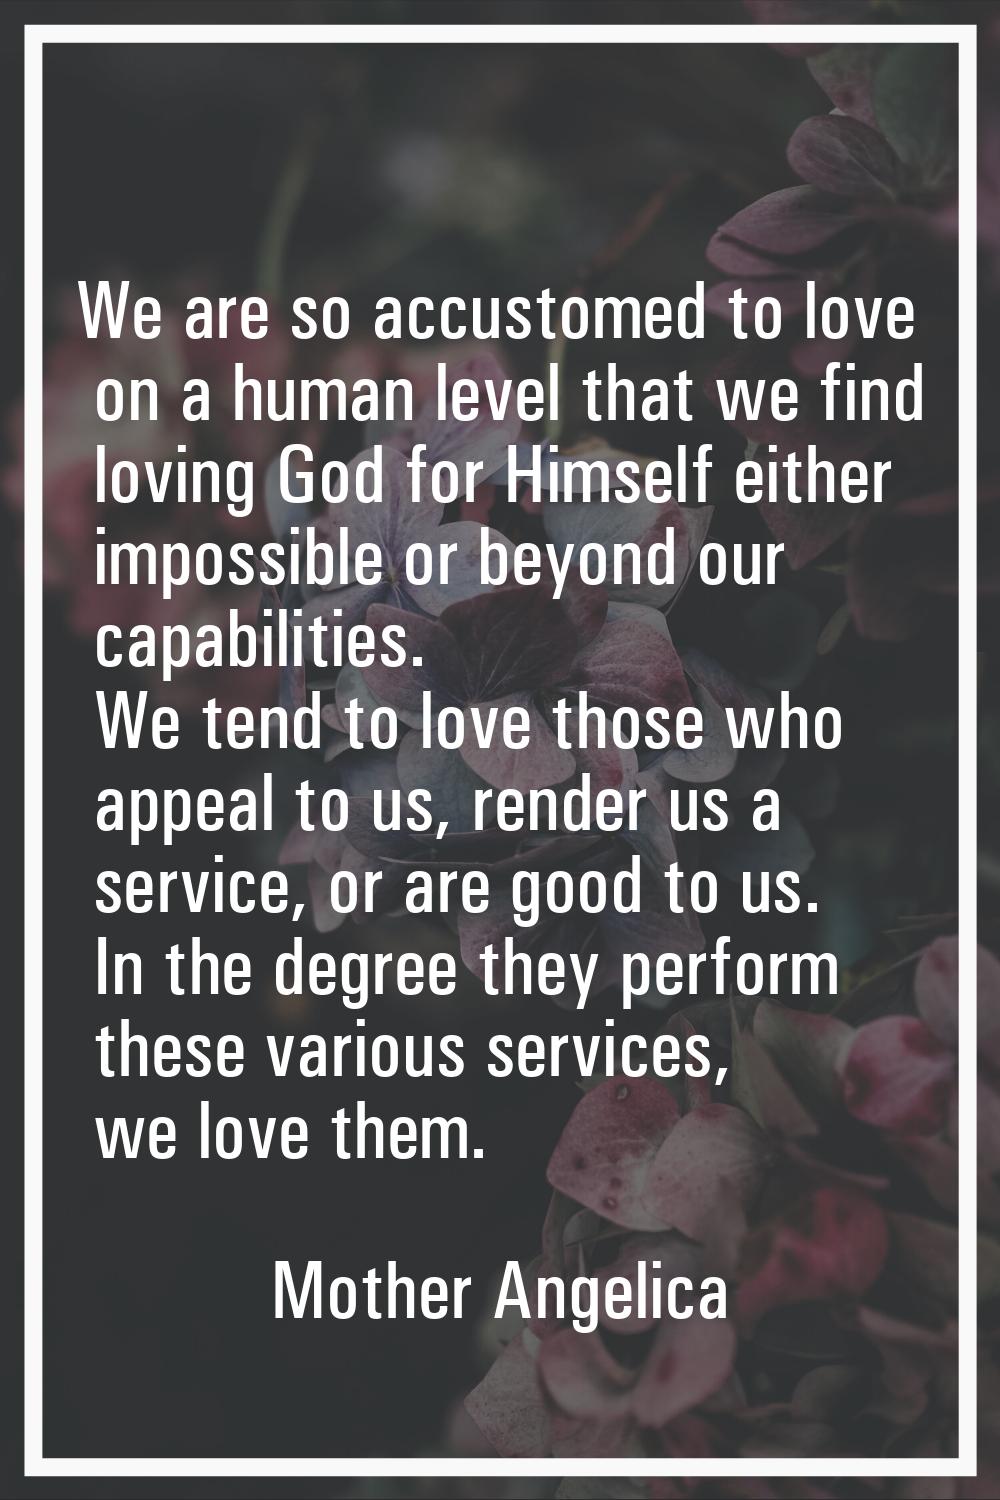 We are so accustomed to love on a human level that we find loving God for Himself either impossible